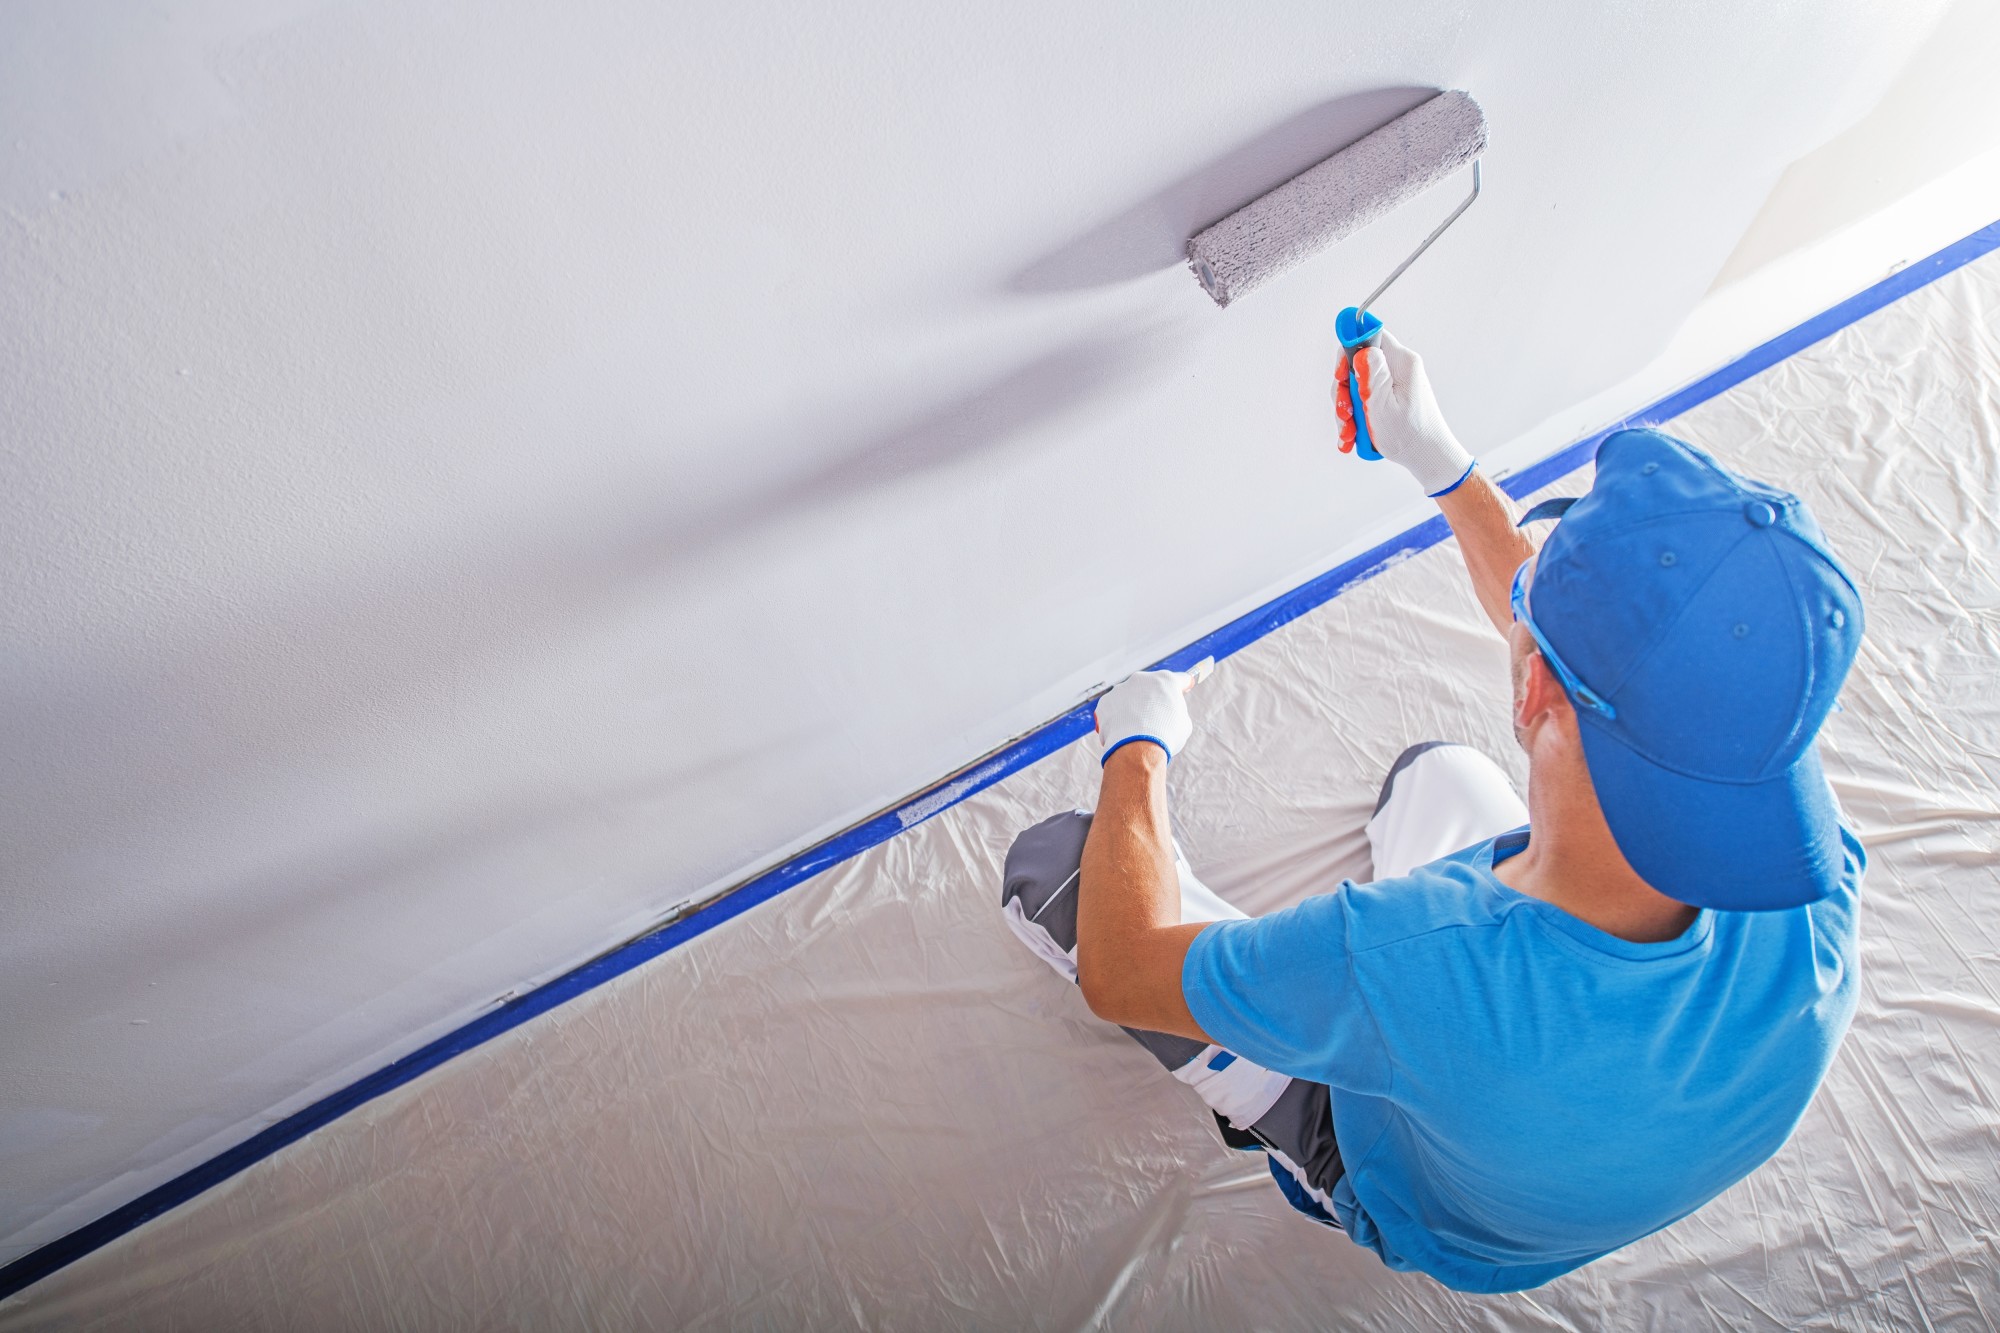 Commercial Painting Companies